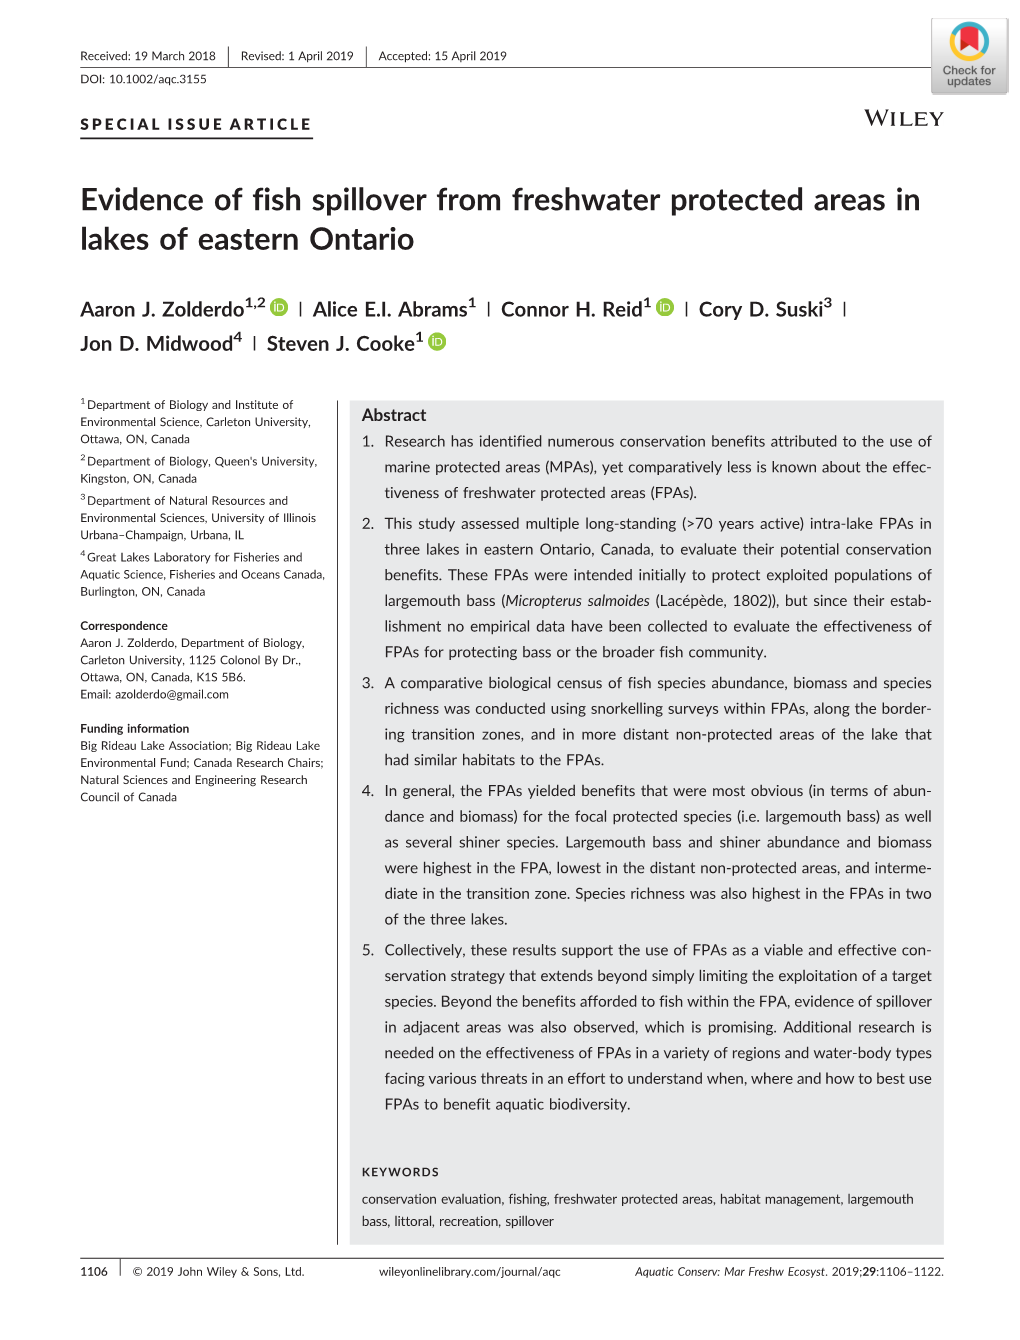 Evidence of Fish Spillover from Freshwater Protected Areas in Lakes of Eastern Ontario